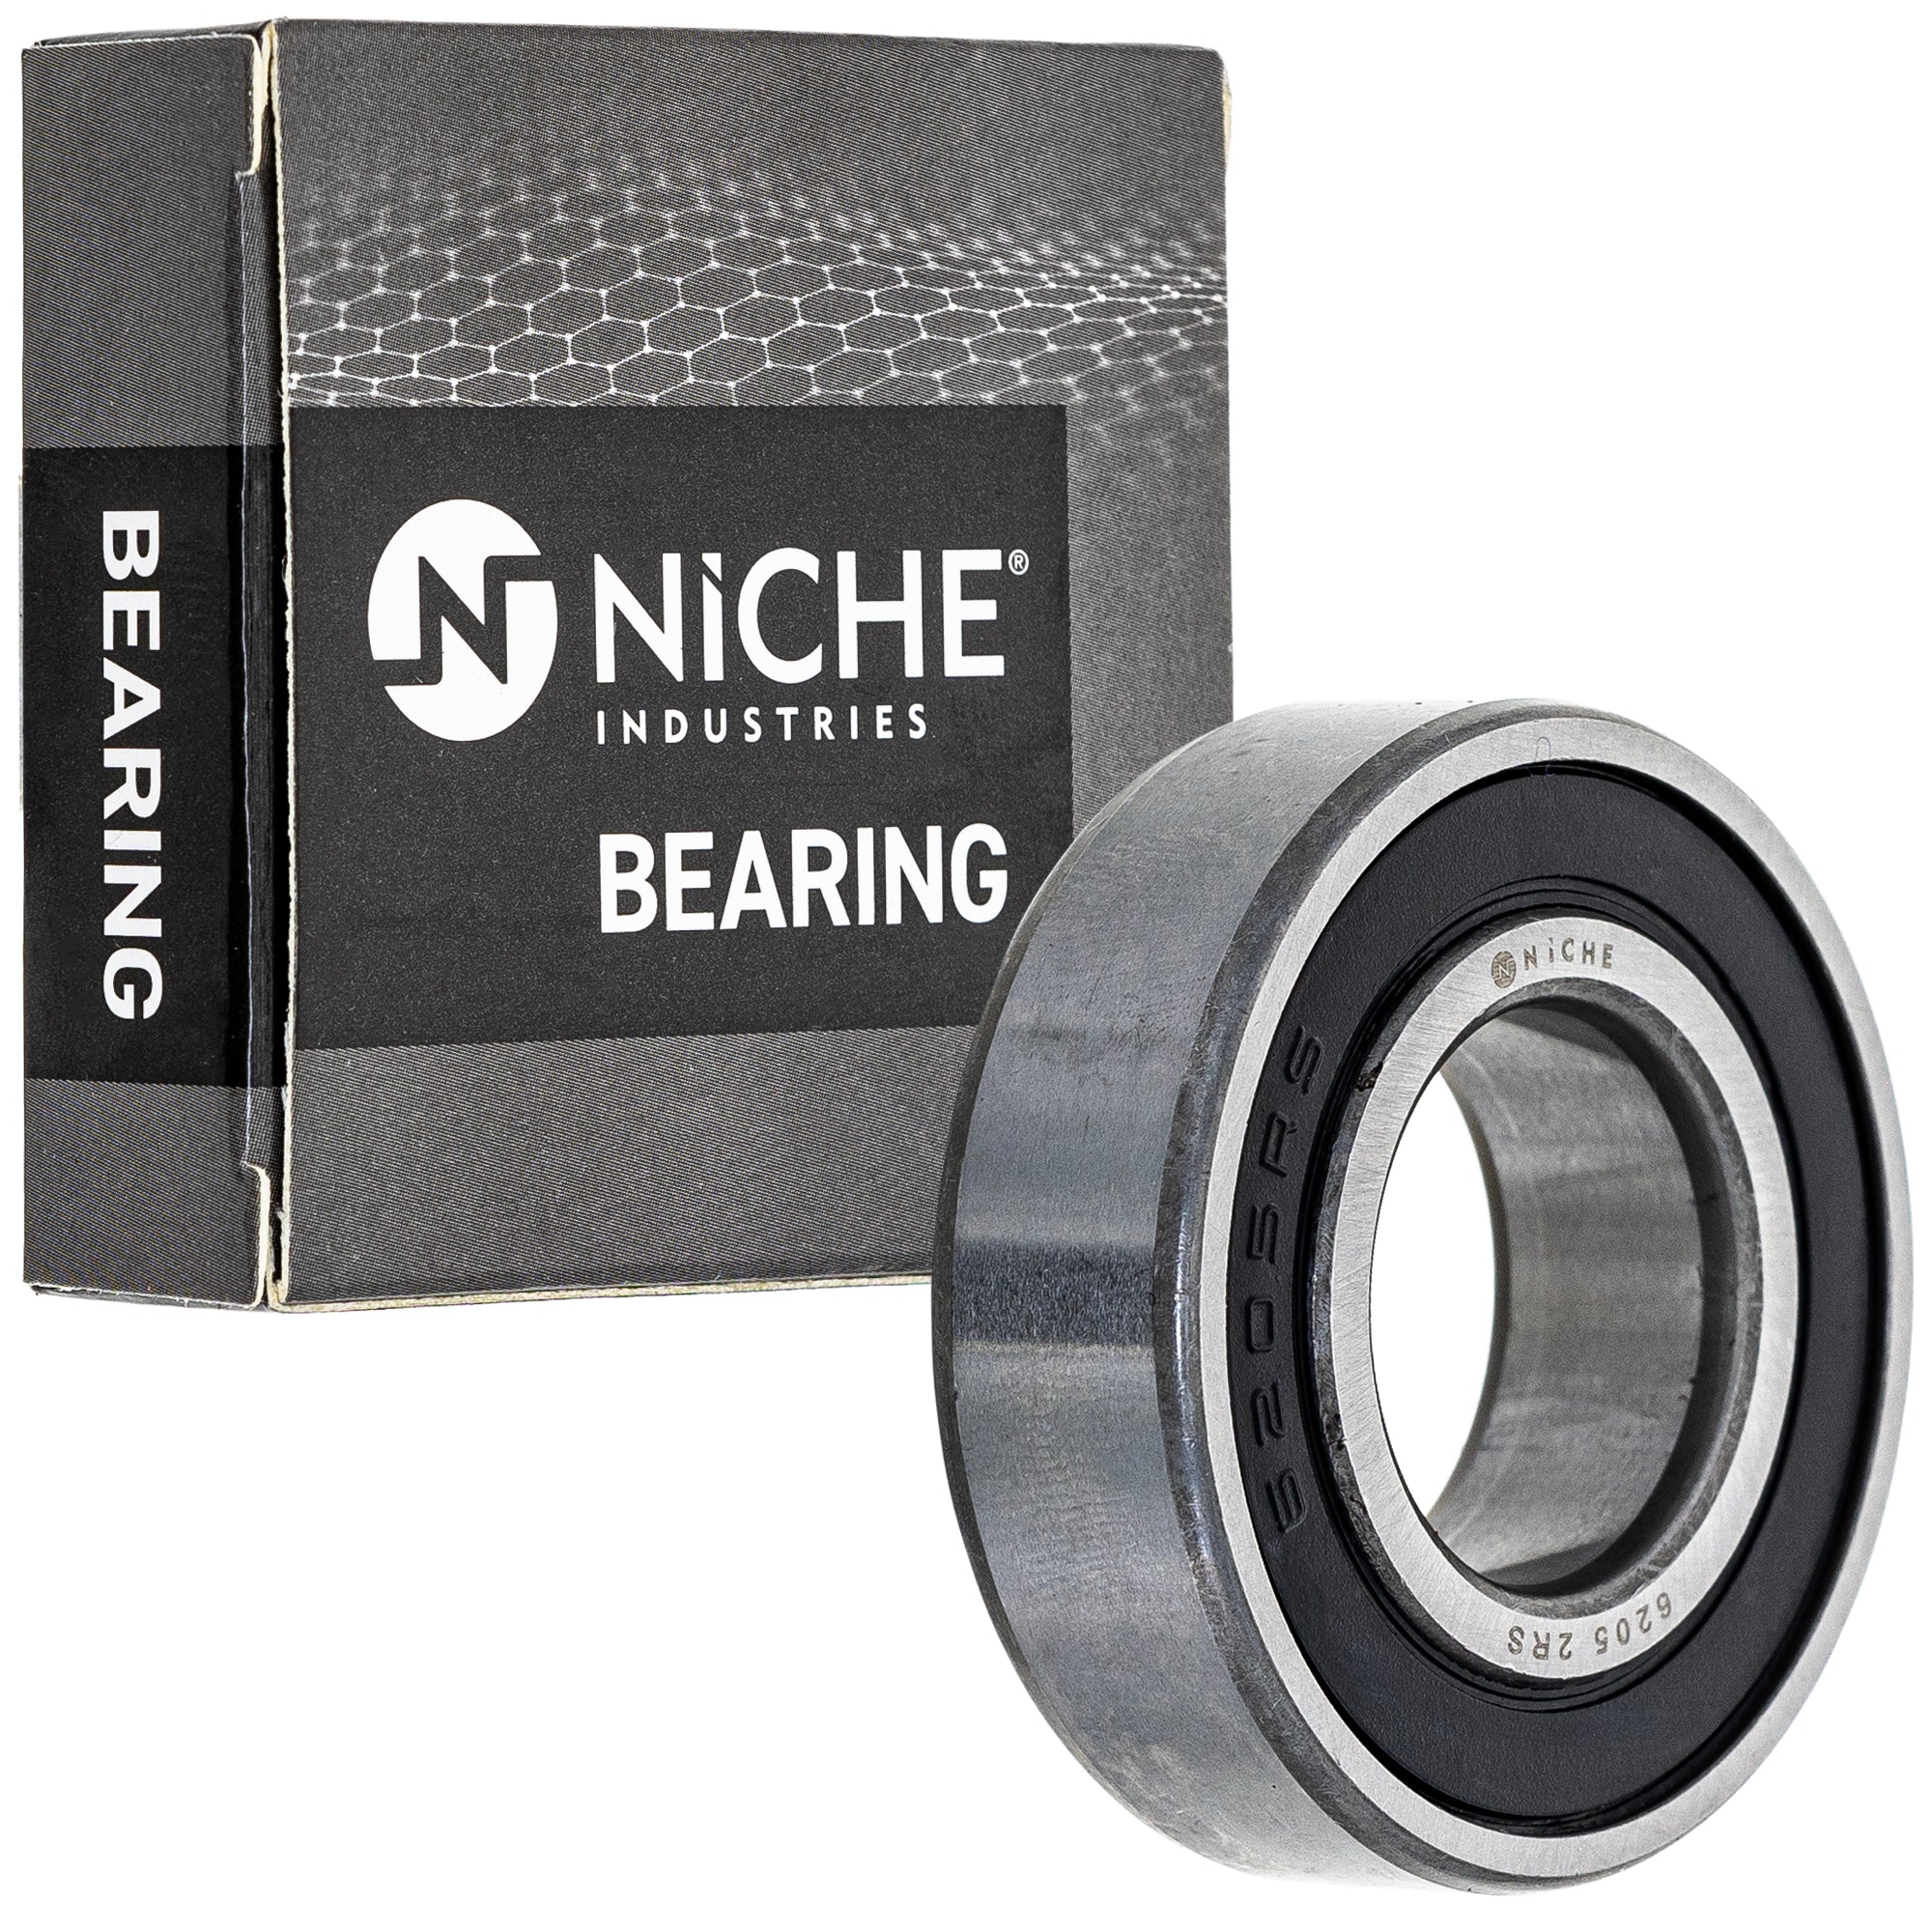 NICHE 519-CBB2228R Bearing & Seal Kit for zOTHER Toro Exmark Snapper